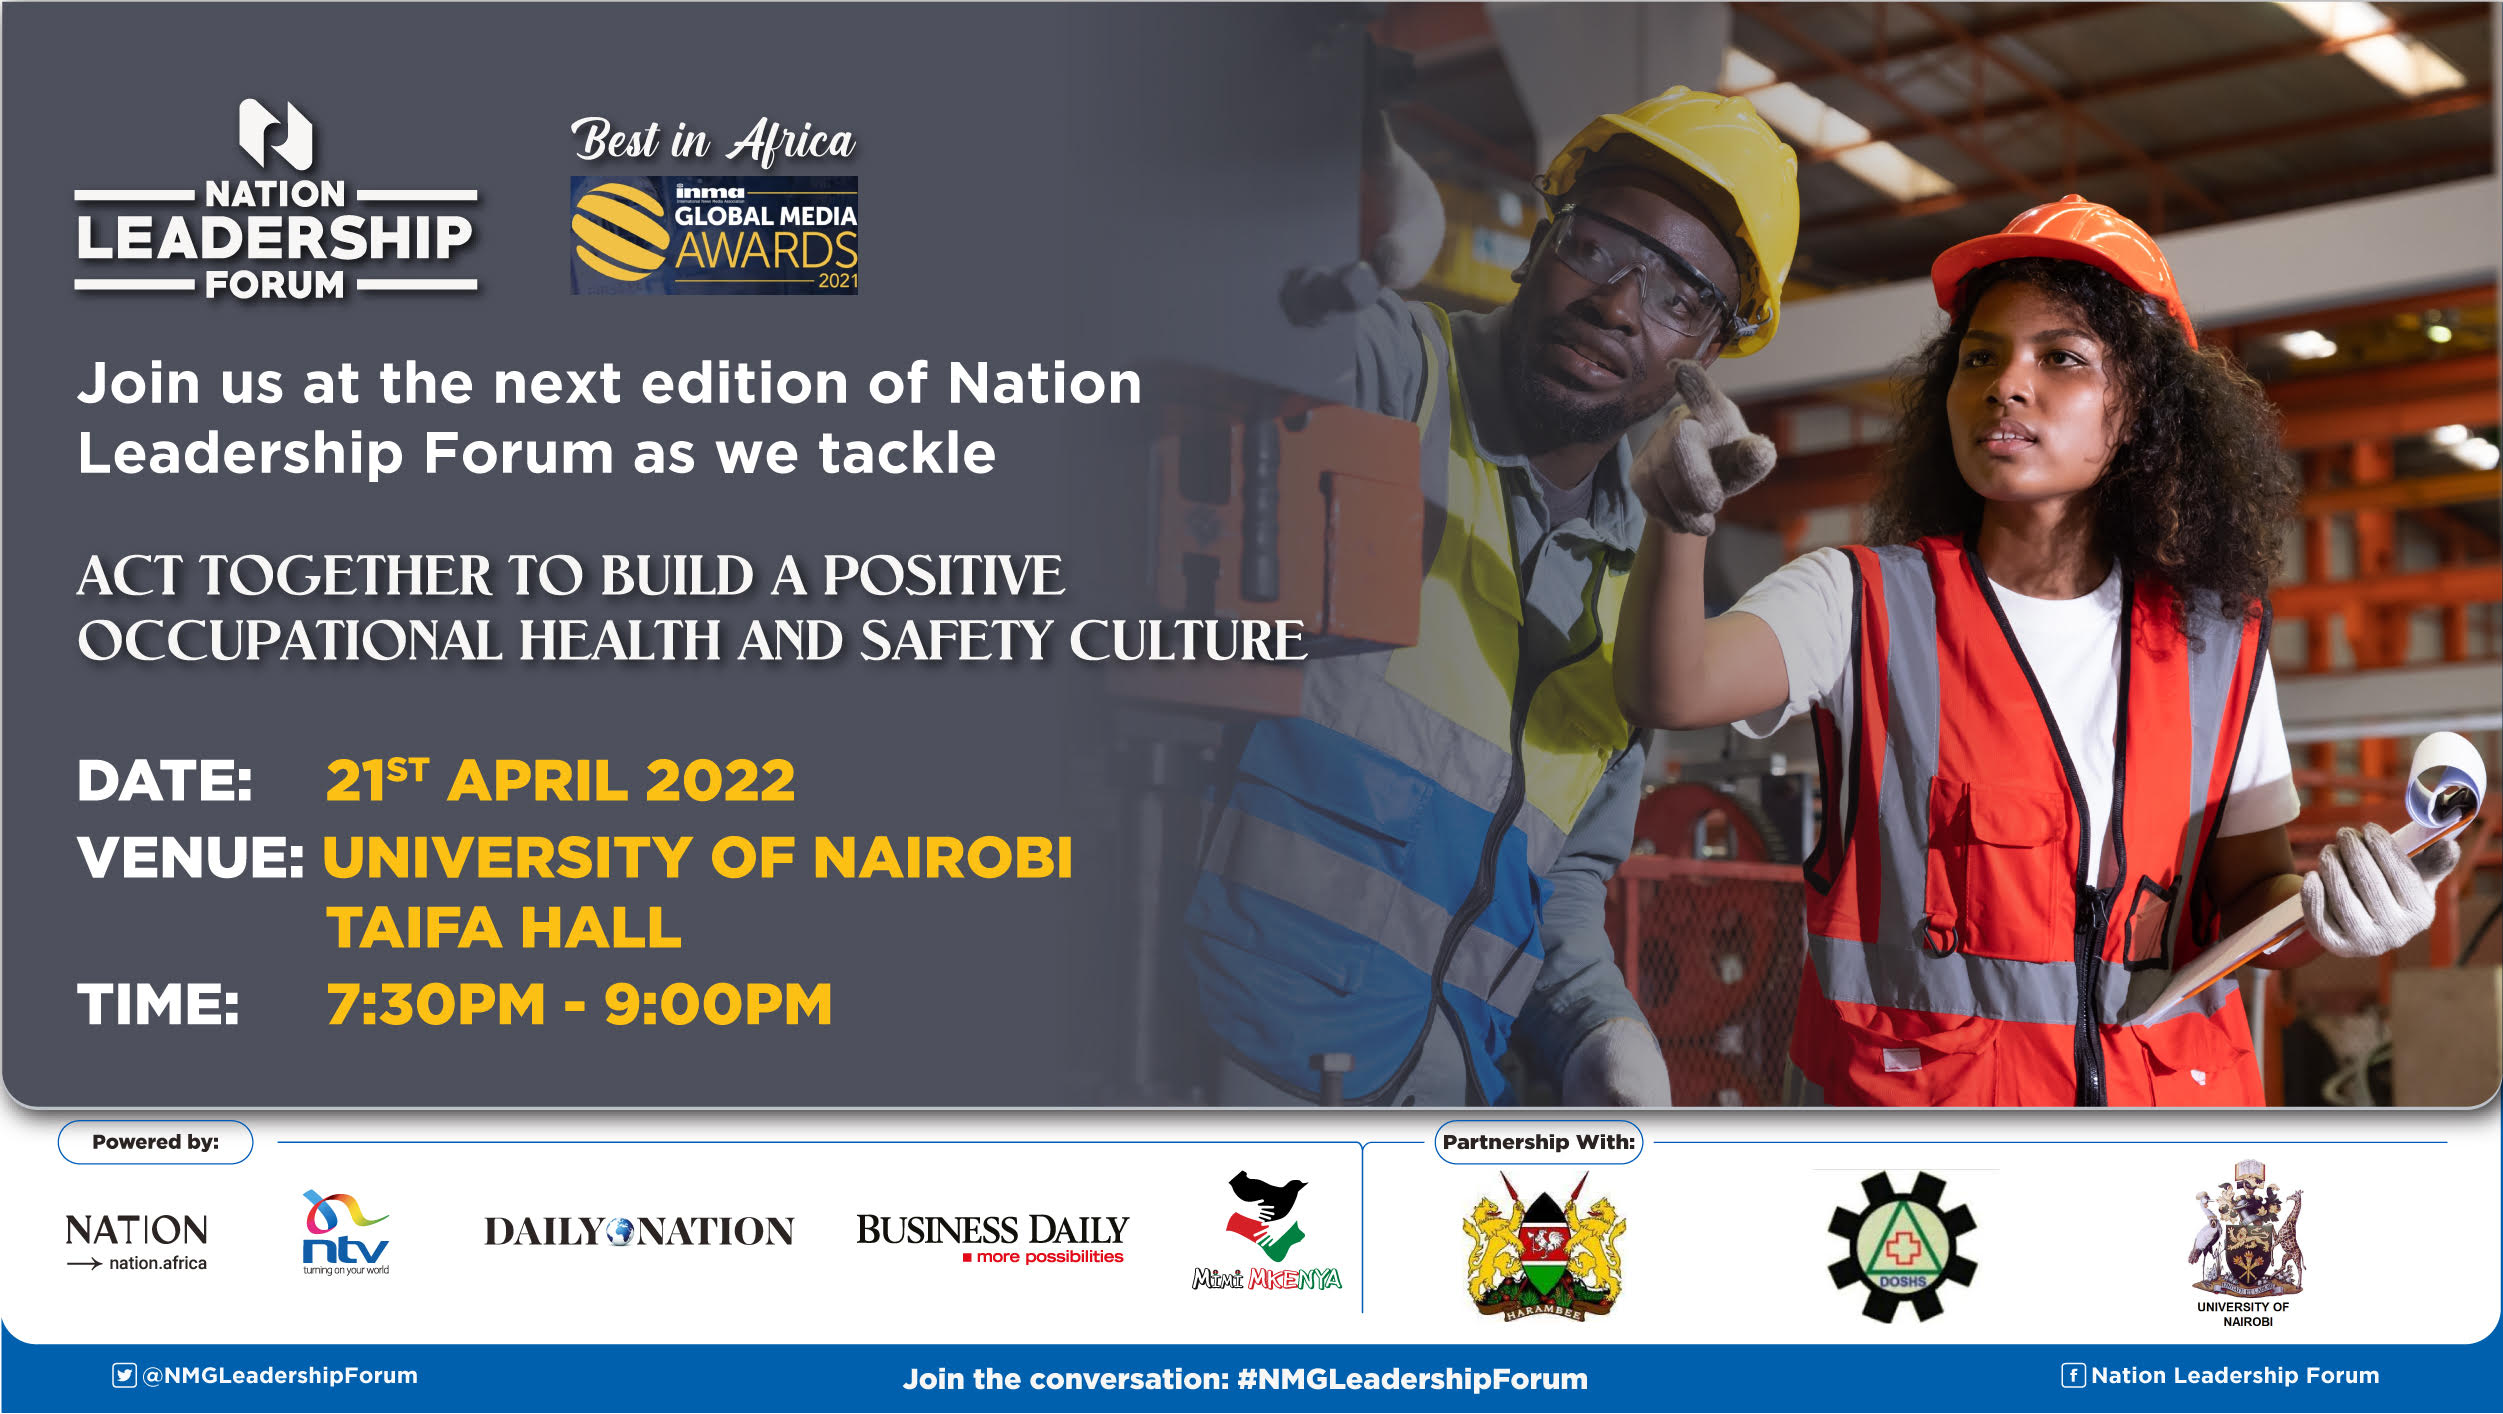 Invitation to Nation Leadership Forum on occupational health & safety culture